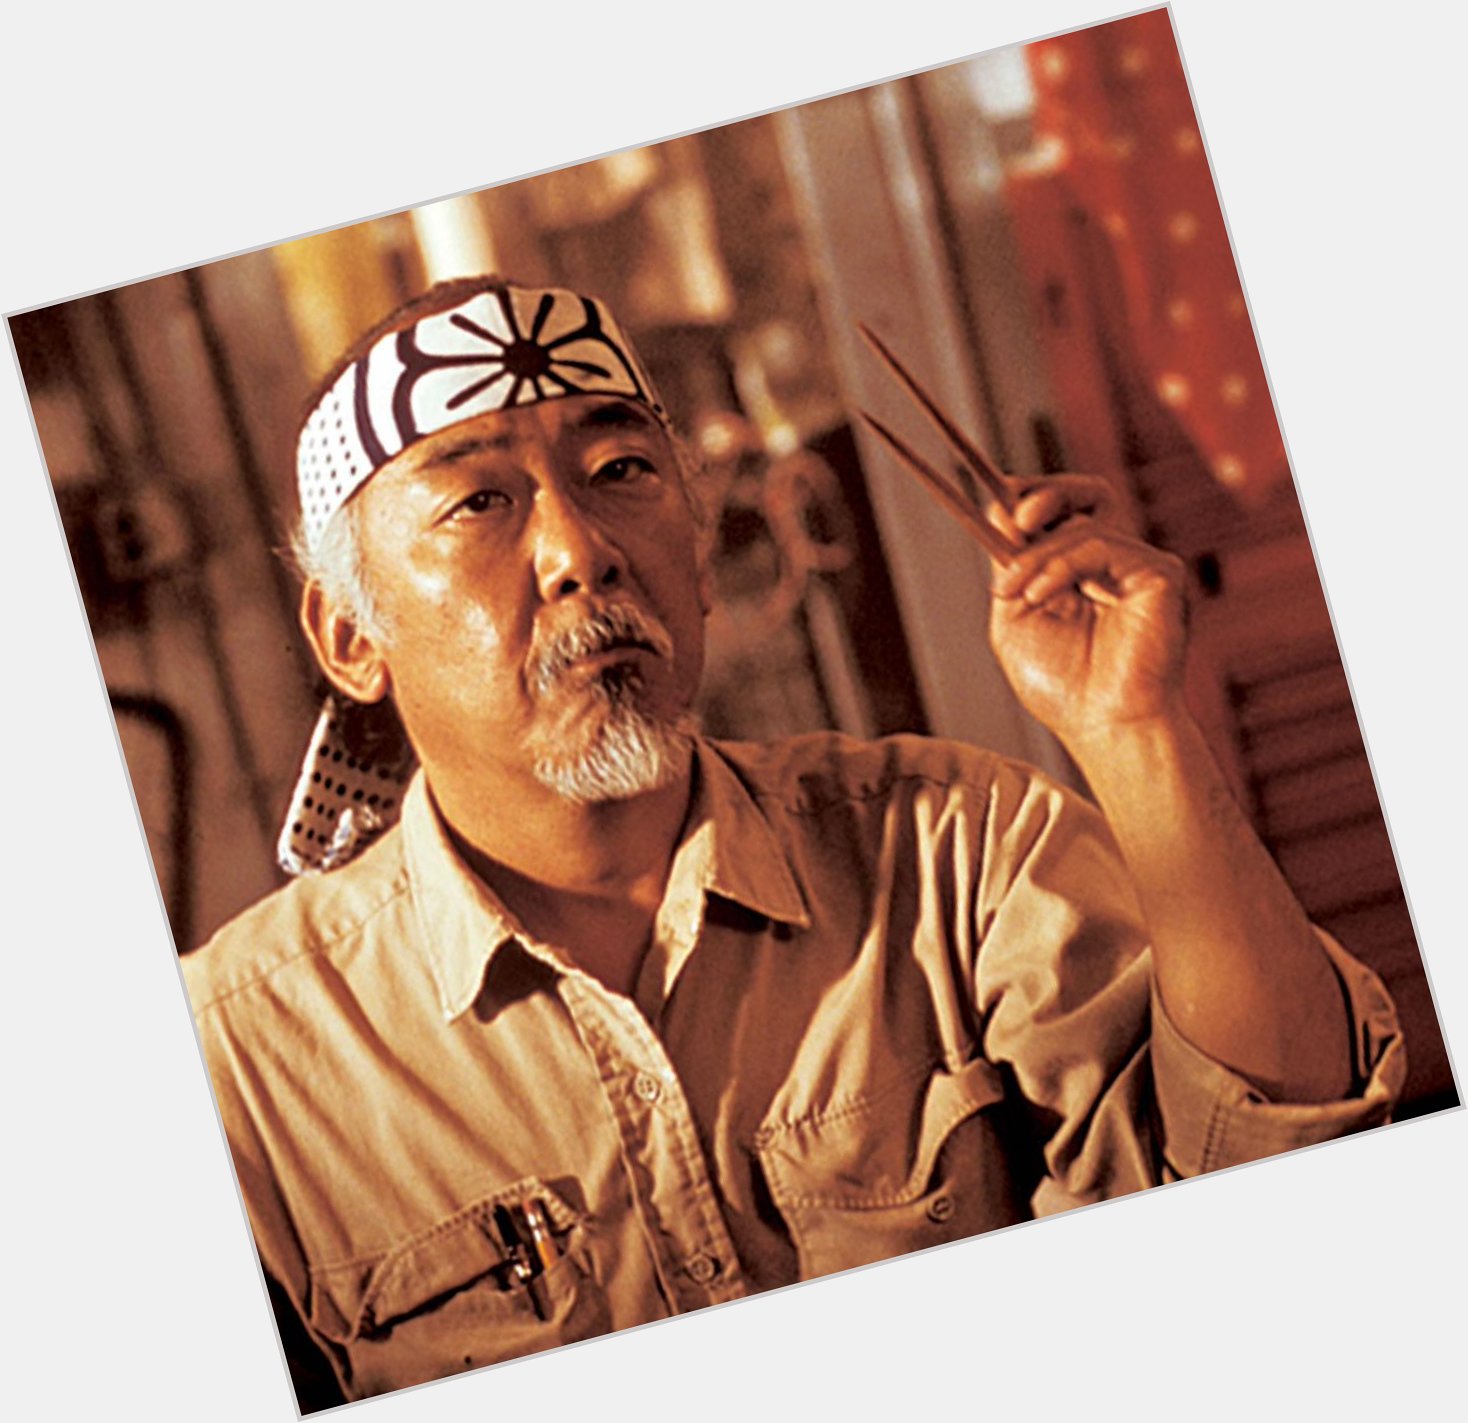 Happy Birthday to Pat Morita, who would have turned 83 today! 